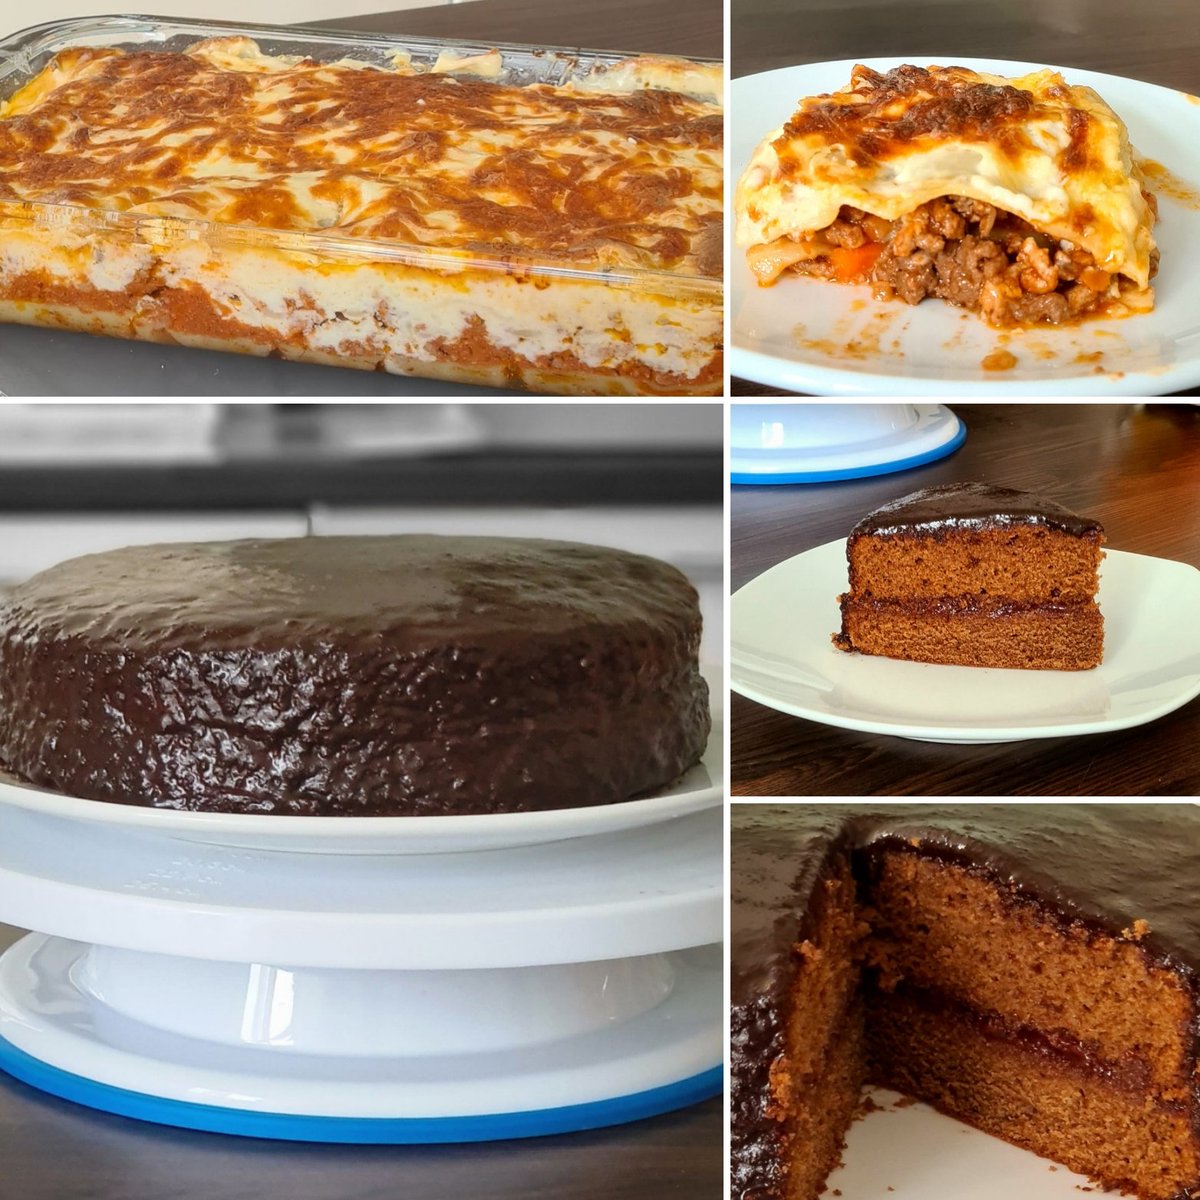 Mother's Day lunch, lasagna and chocolate cake with raspberry filling 😋😍 #homemadecooking #ChemistsWhoCook #MothersDay2023 #happymothersday